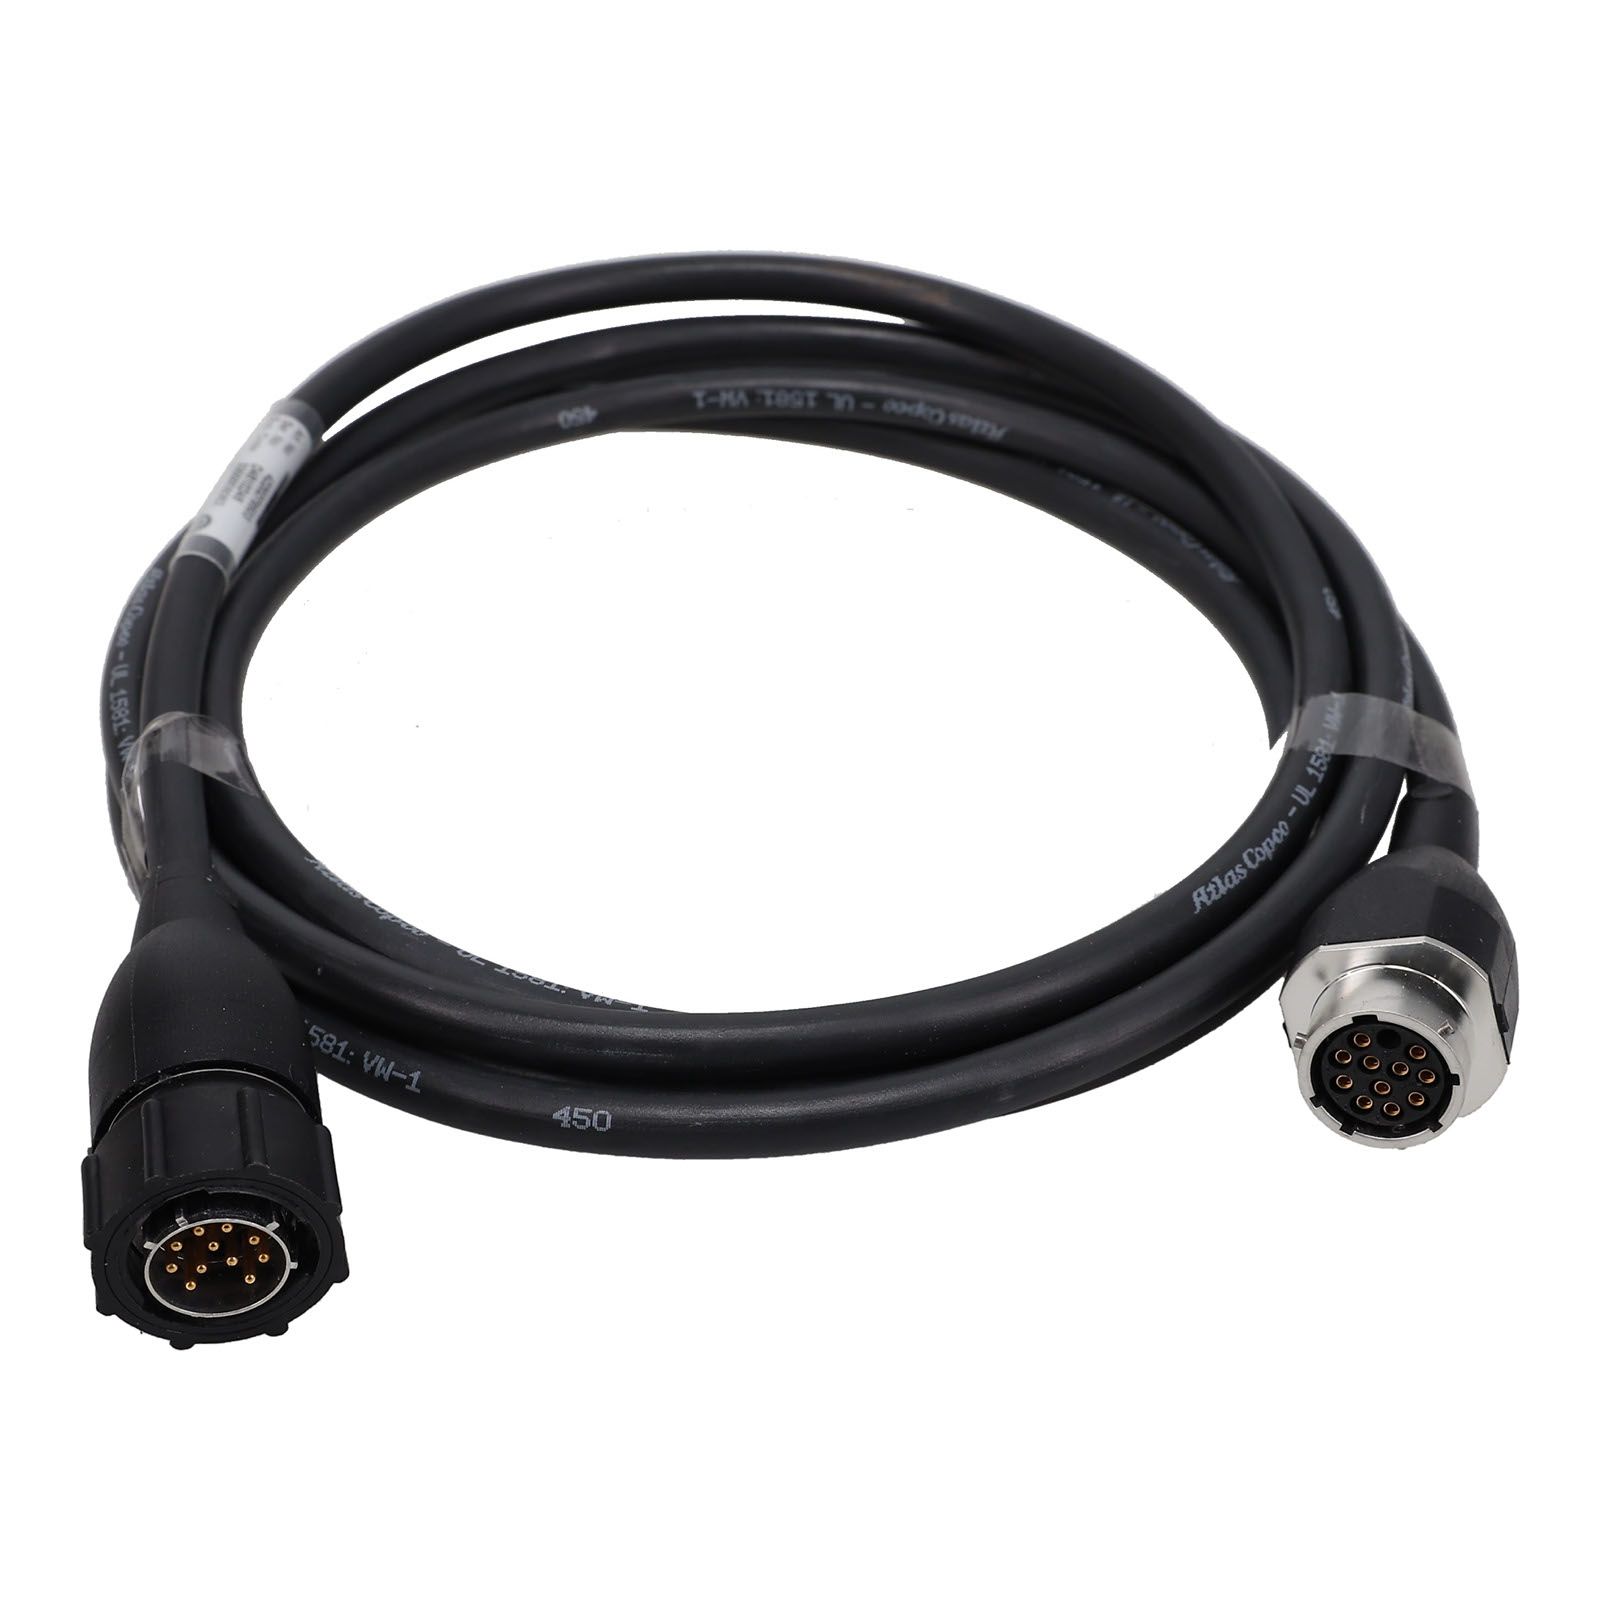 Tool cable extension product photo